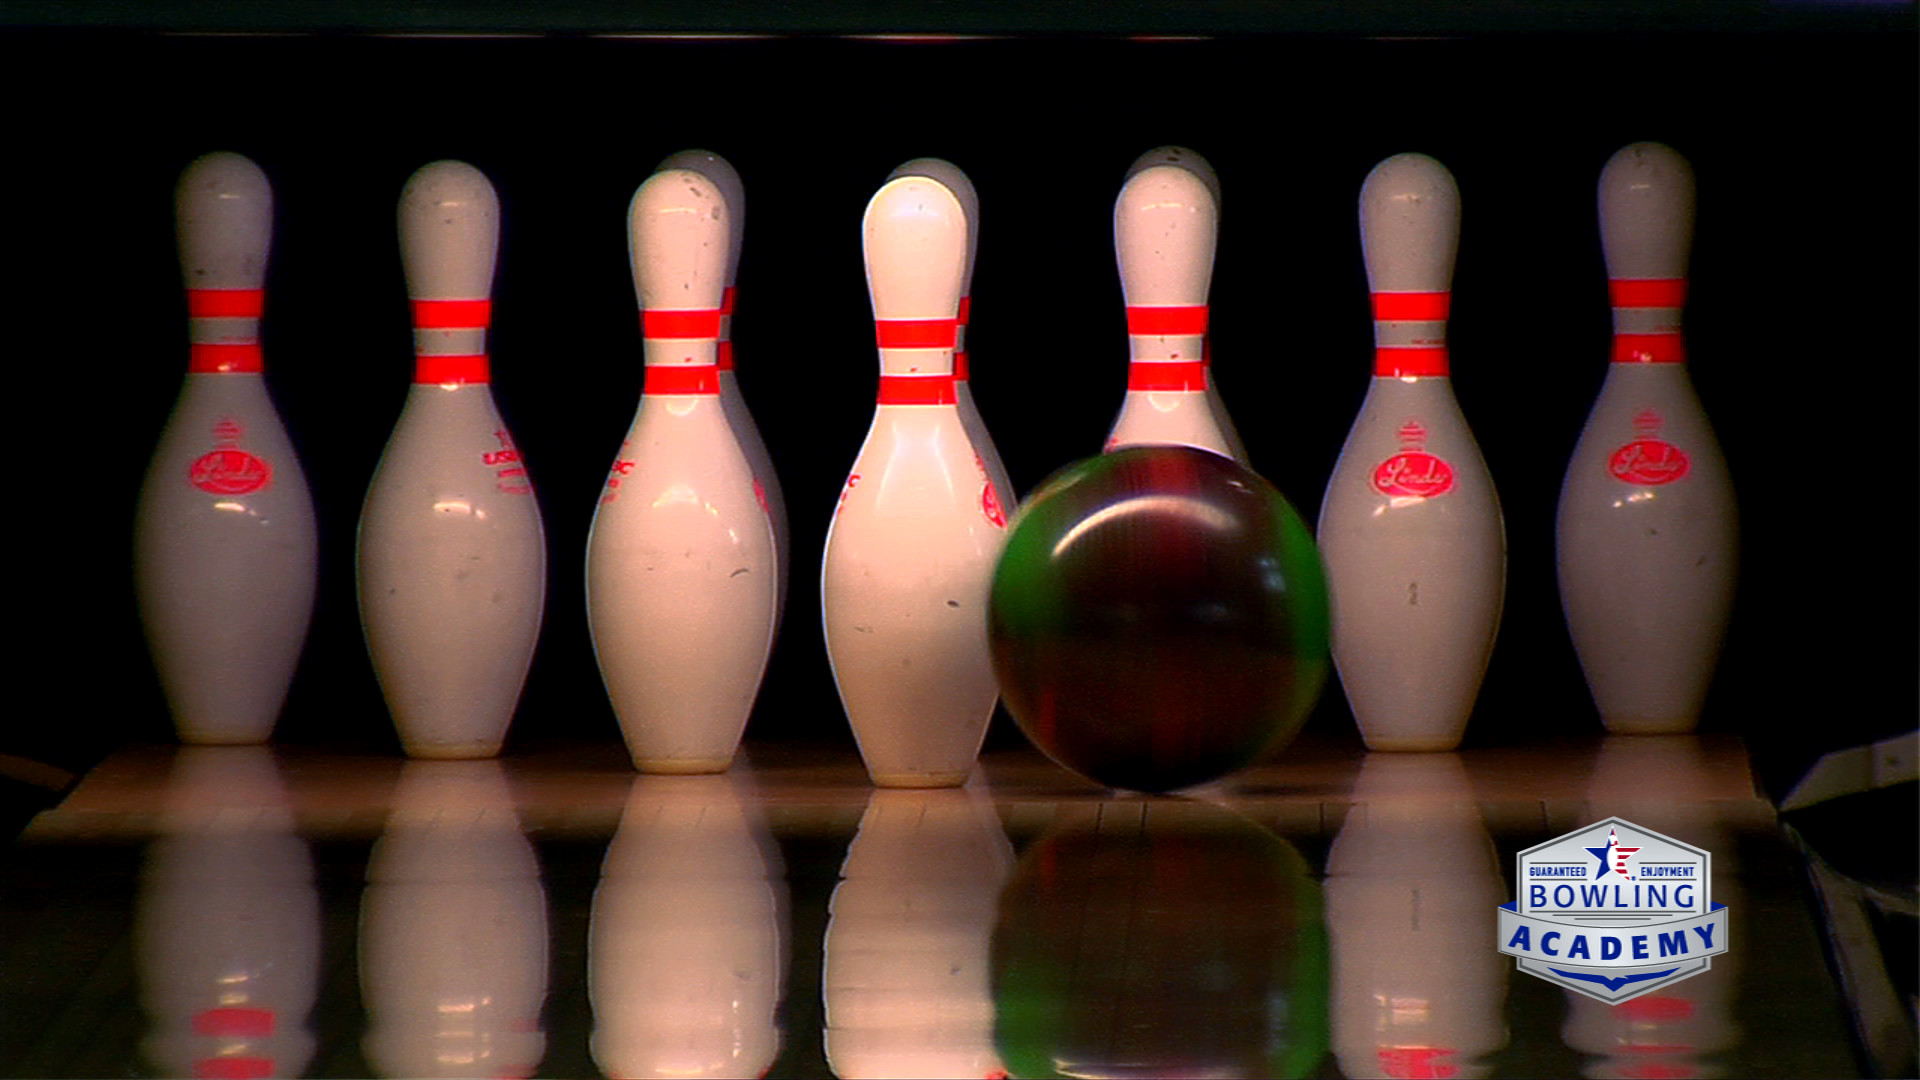 1920x1080 Learn-how-proper-on-lane-bowling-adjustments-can-